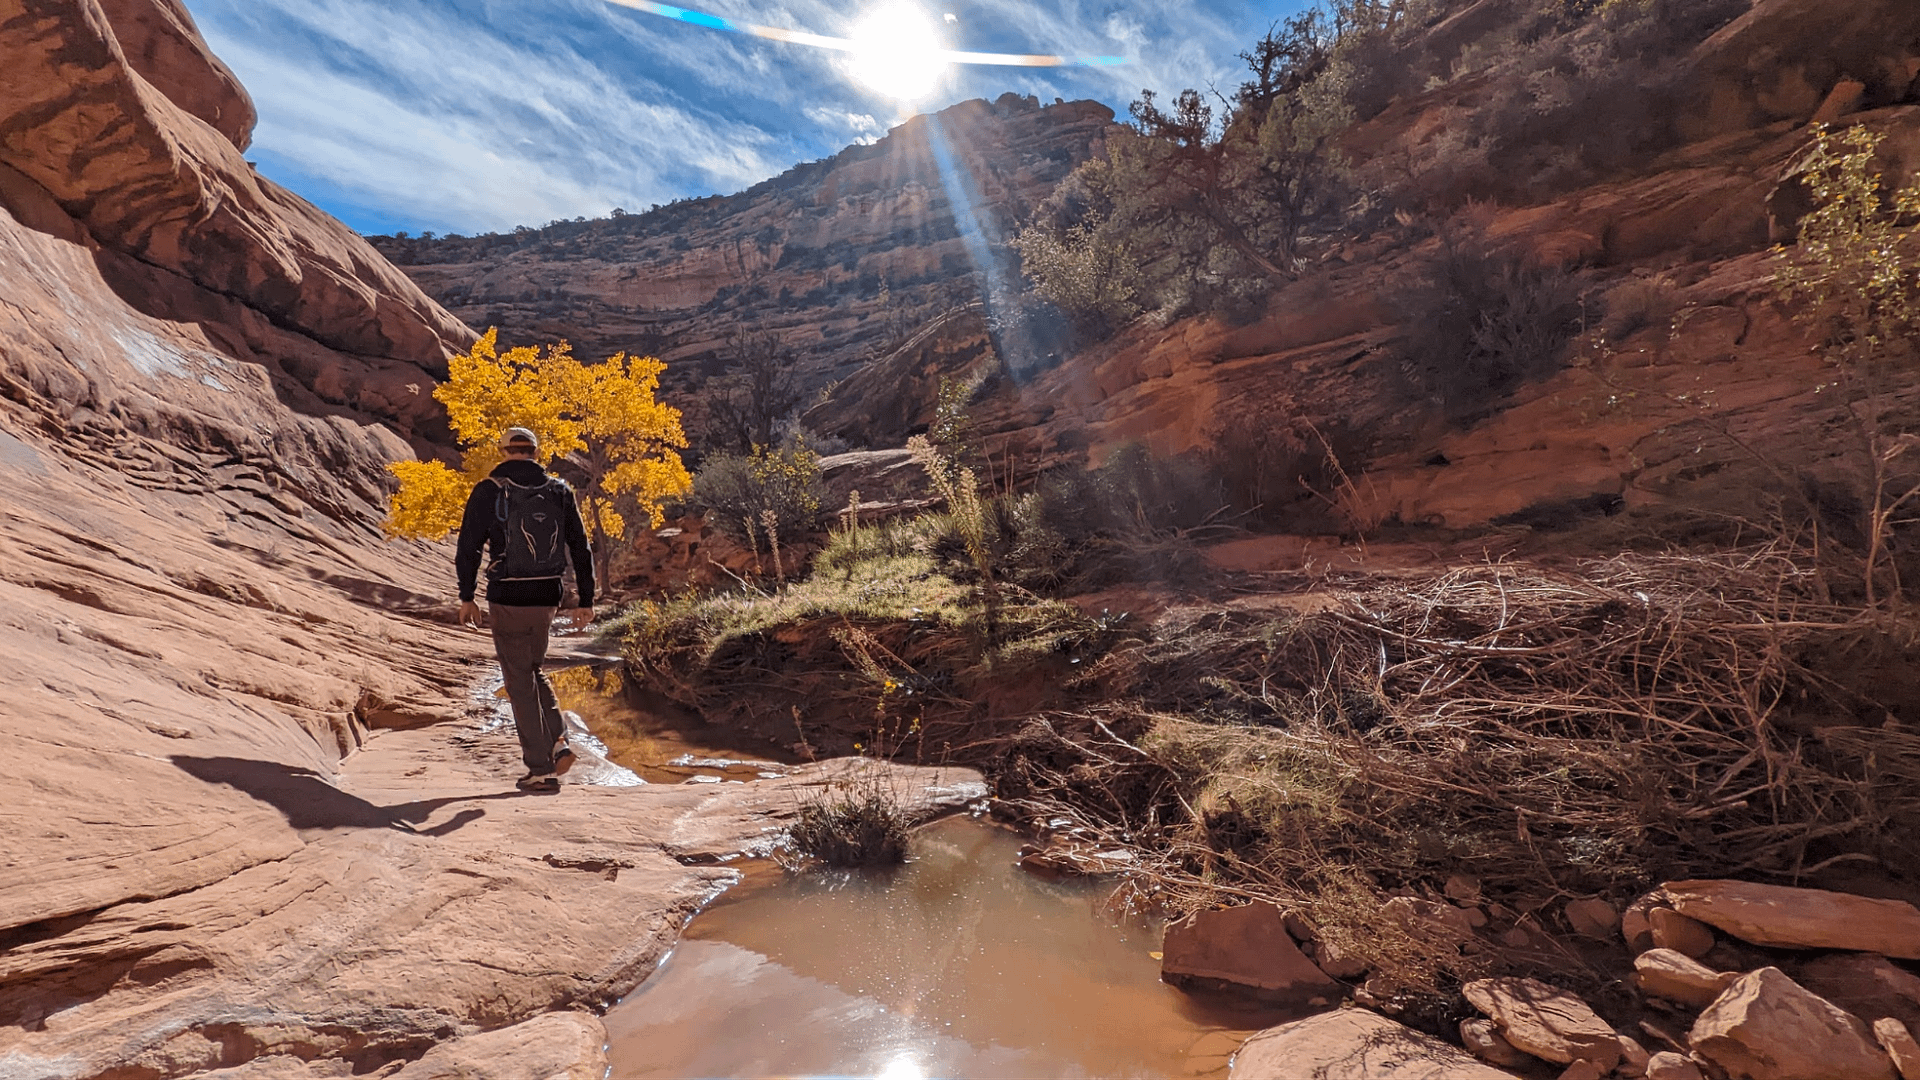 ‘Awesome’ Solitude: An Extended Hike in Bears Ears National Monument